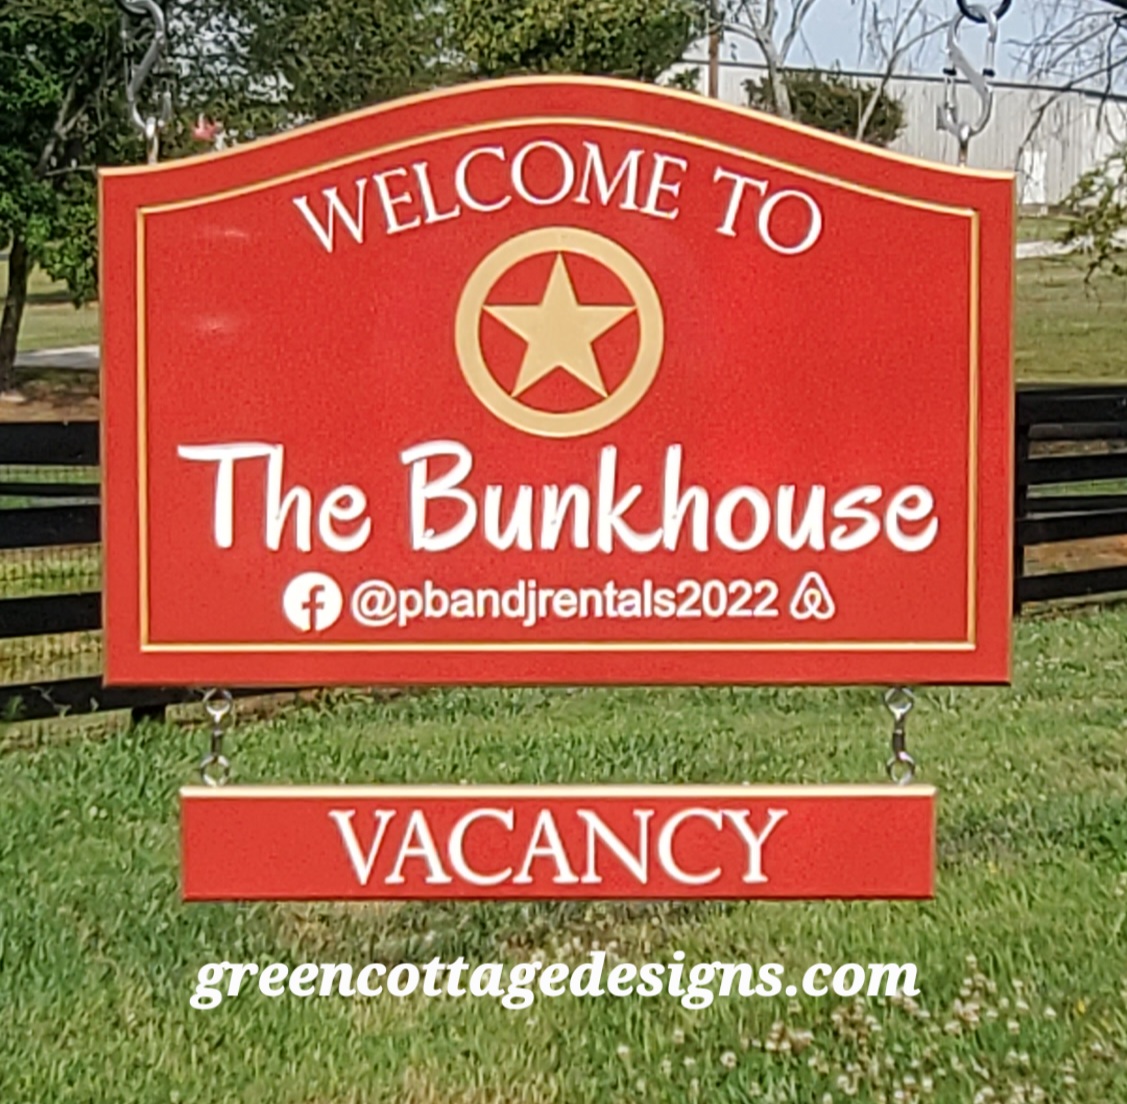 Texas Star Signs Welcome to the Bunkhouse Vacancy Sign by greencottagedesigns.com Solid PVC Carved Painted Hanging Signs Outdoor Foot Traffic Roadside Signs #thebunkhouse #pvcsign #TexasSigns #pbandjrentals #bunkhousesign